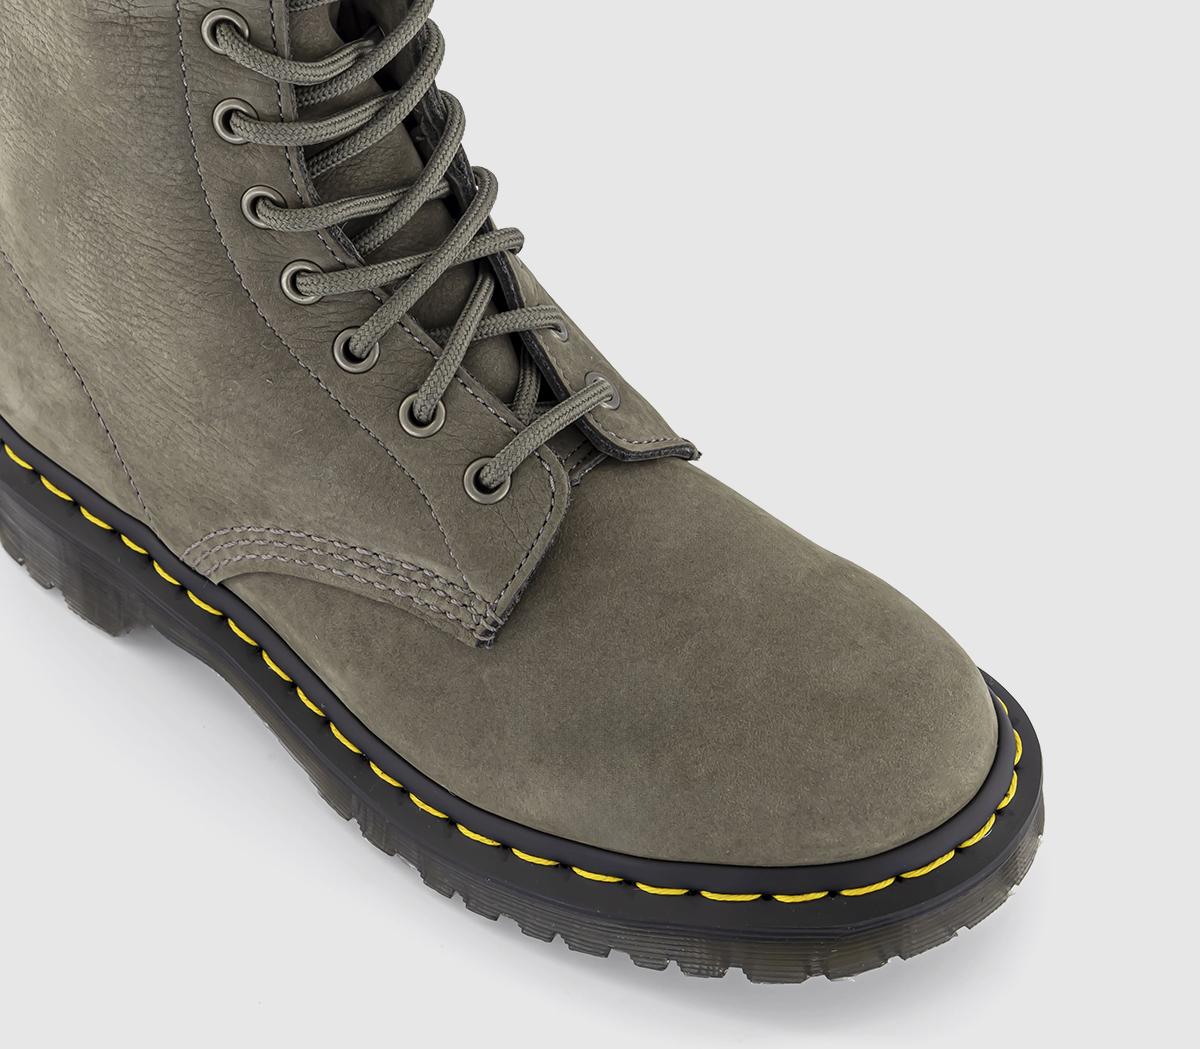 Dr. Martens 1460 Serena 8 Eye Boots Nickel Grey - Women's Ankle Boots